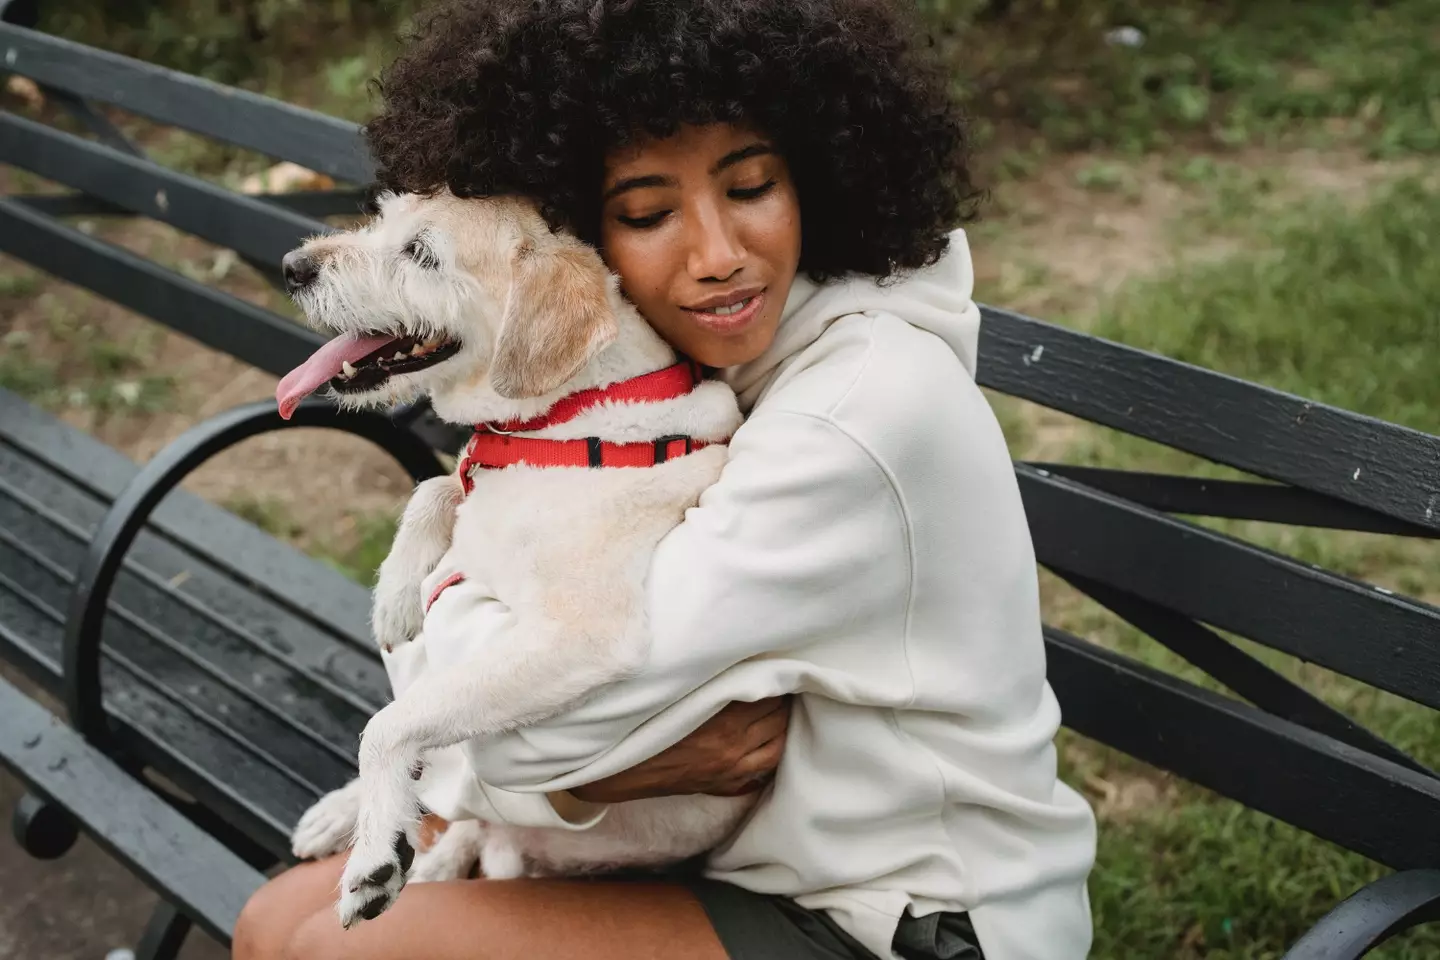 A psychologist has shared a warning about hugging dogs.